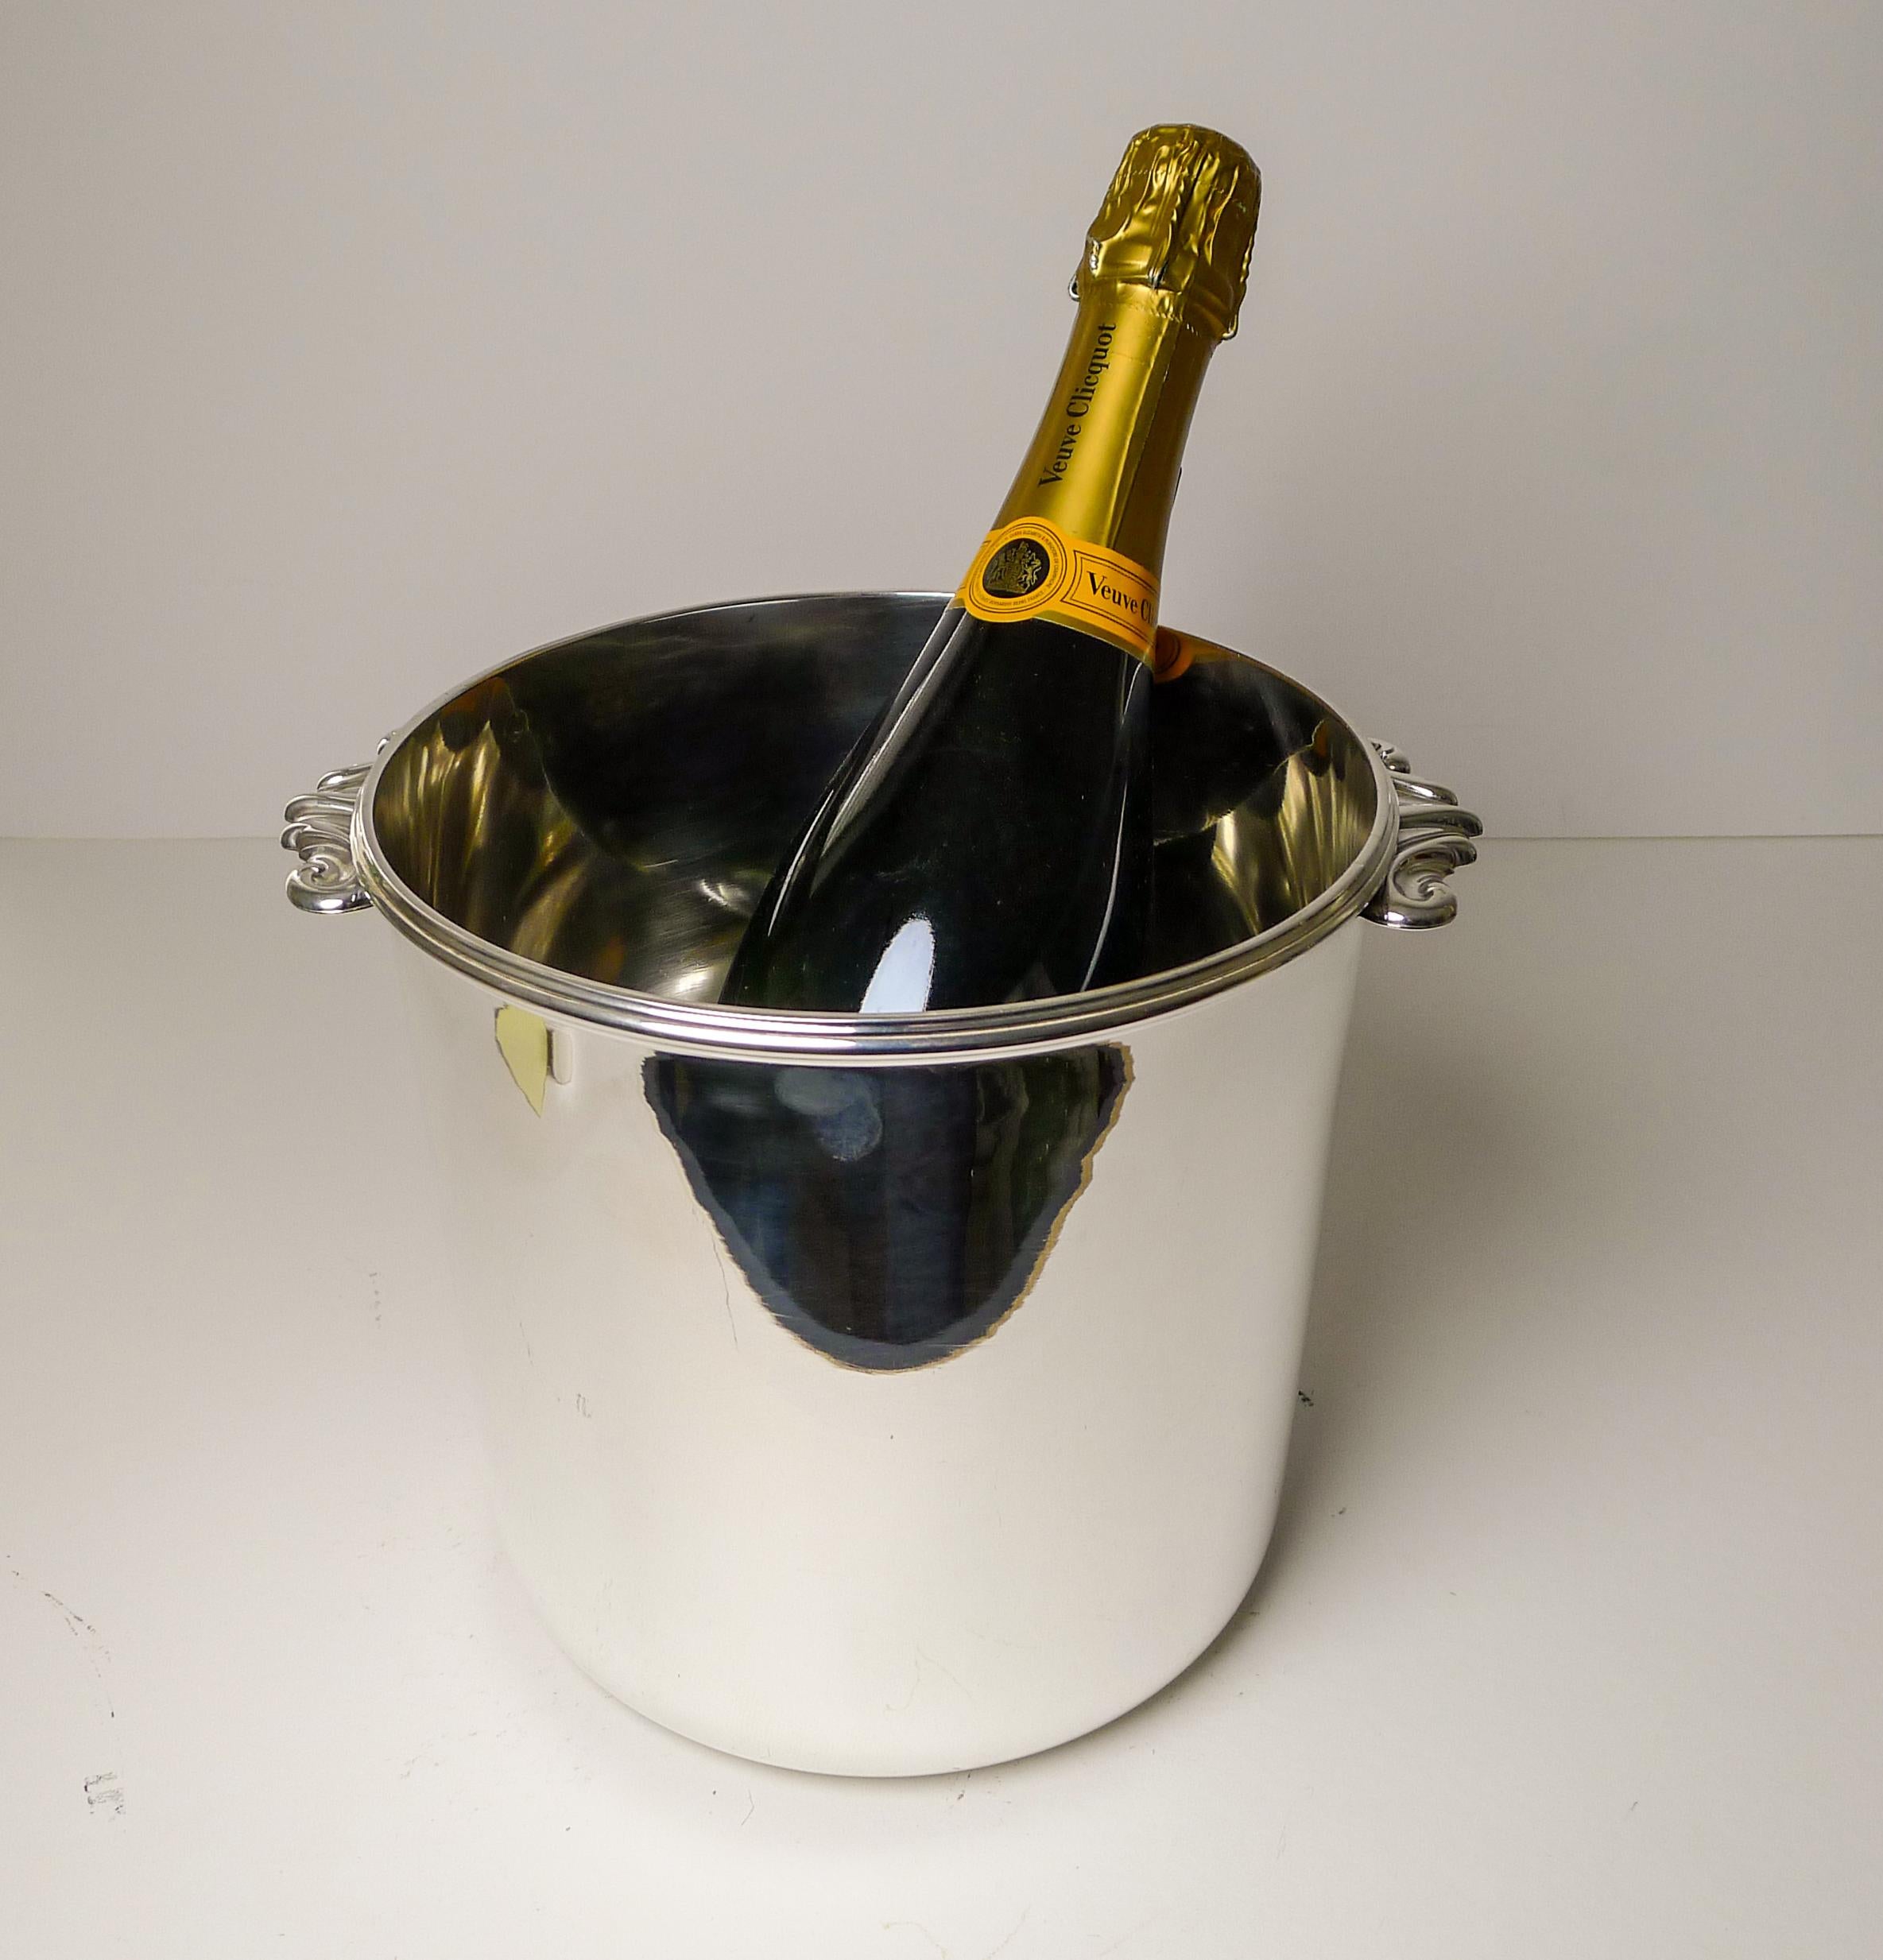 Vintage French Silver Plated Wine or Champagne Cooler / Bucket, Puiforcat For Sale 9